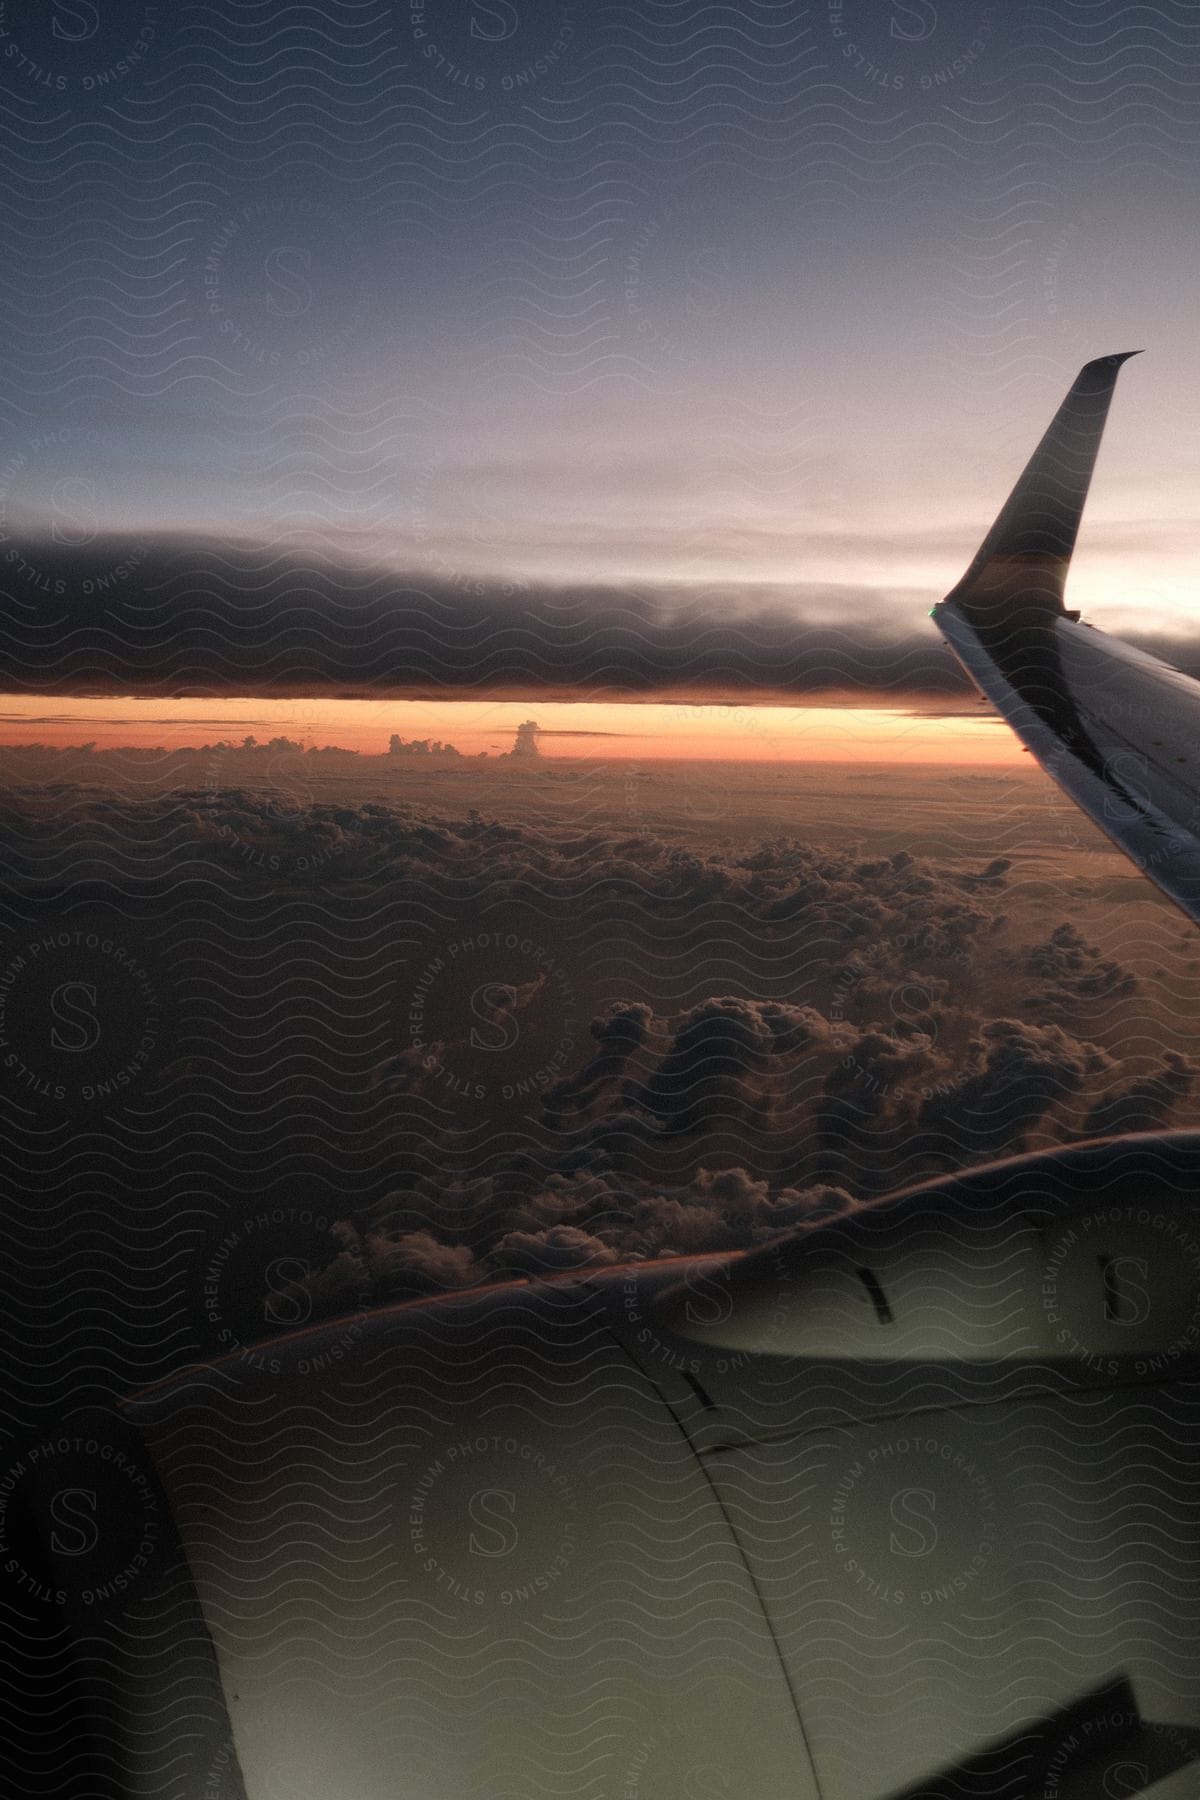 A photo from inside an airplane showing the wing and engine, with the sun setting over clouds and the sky.